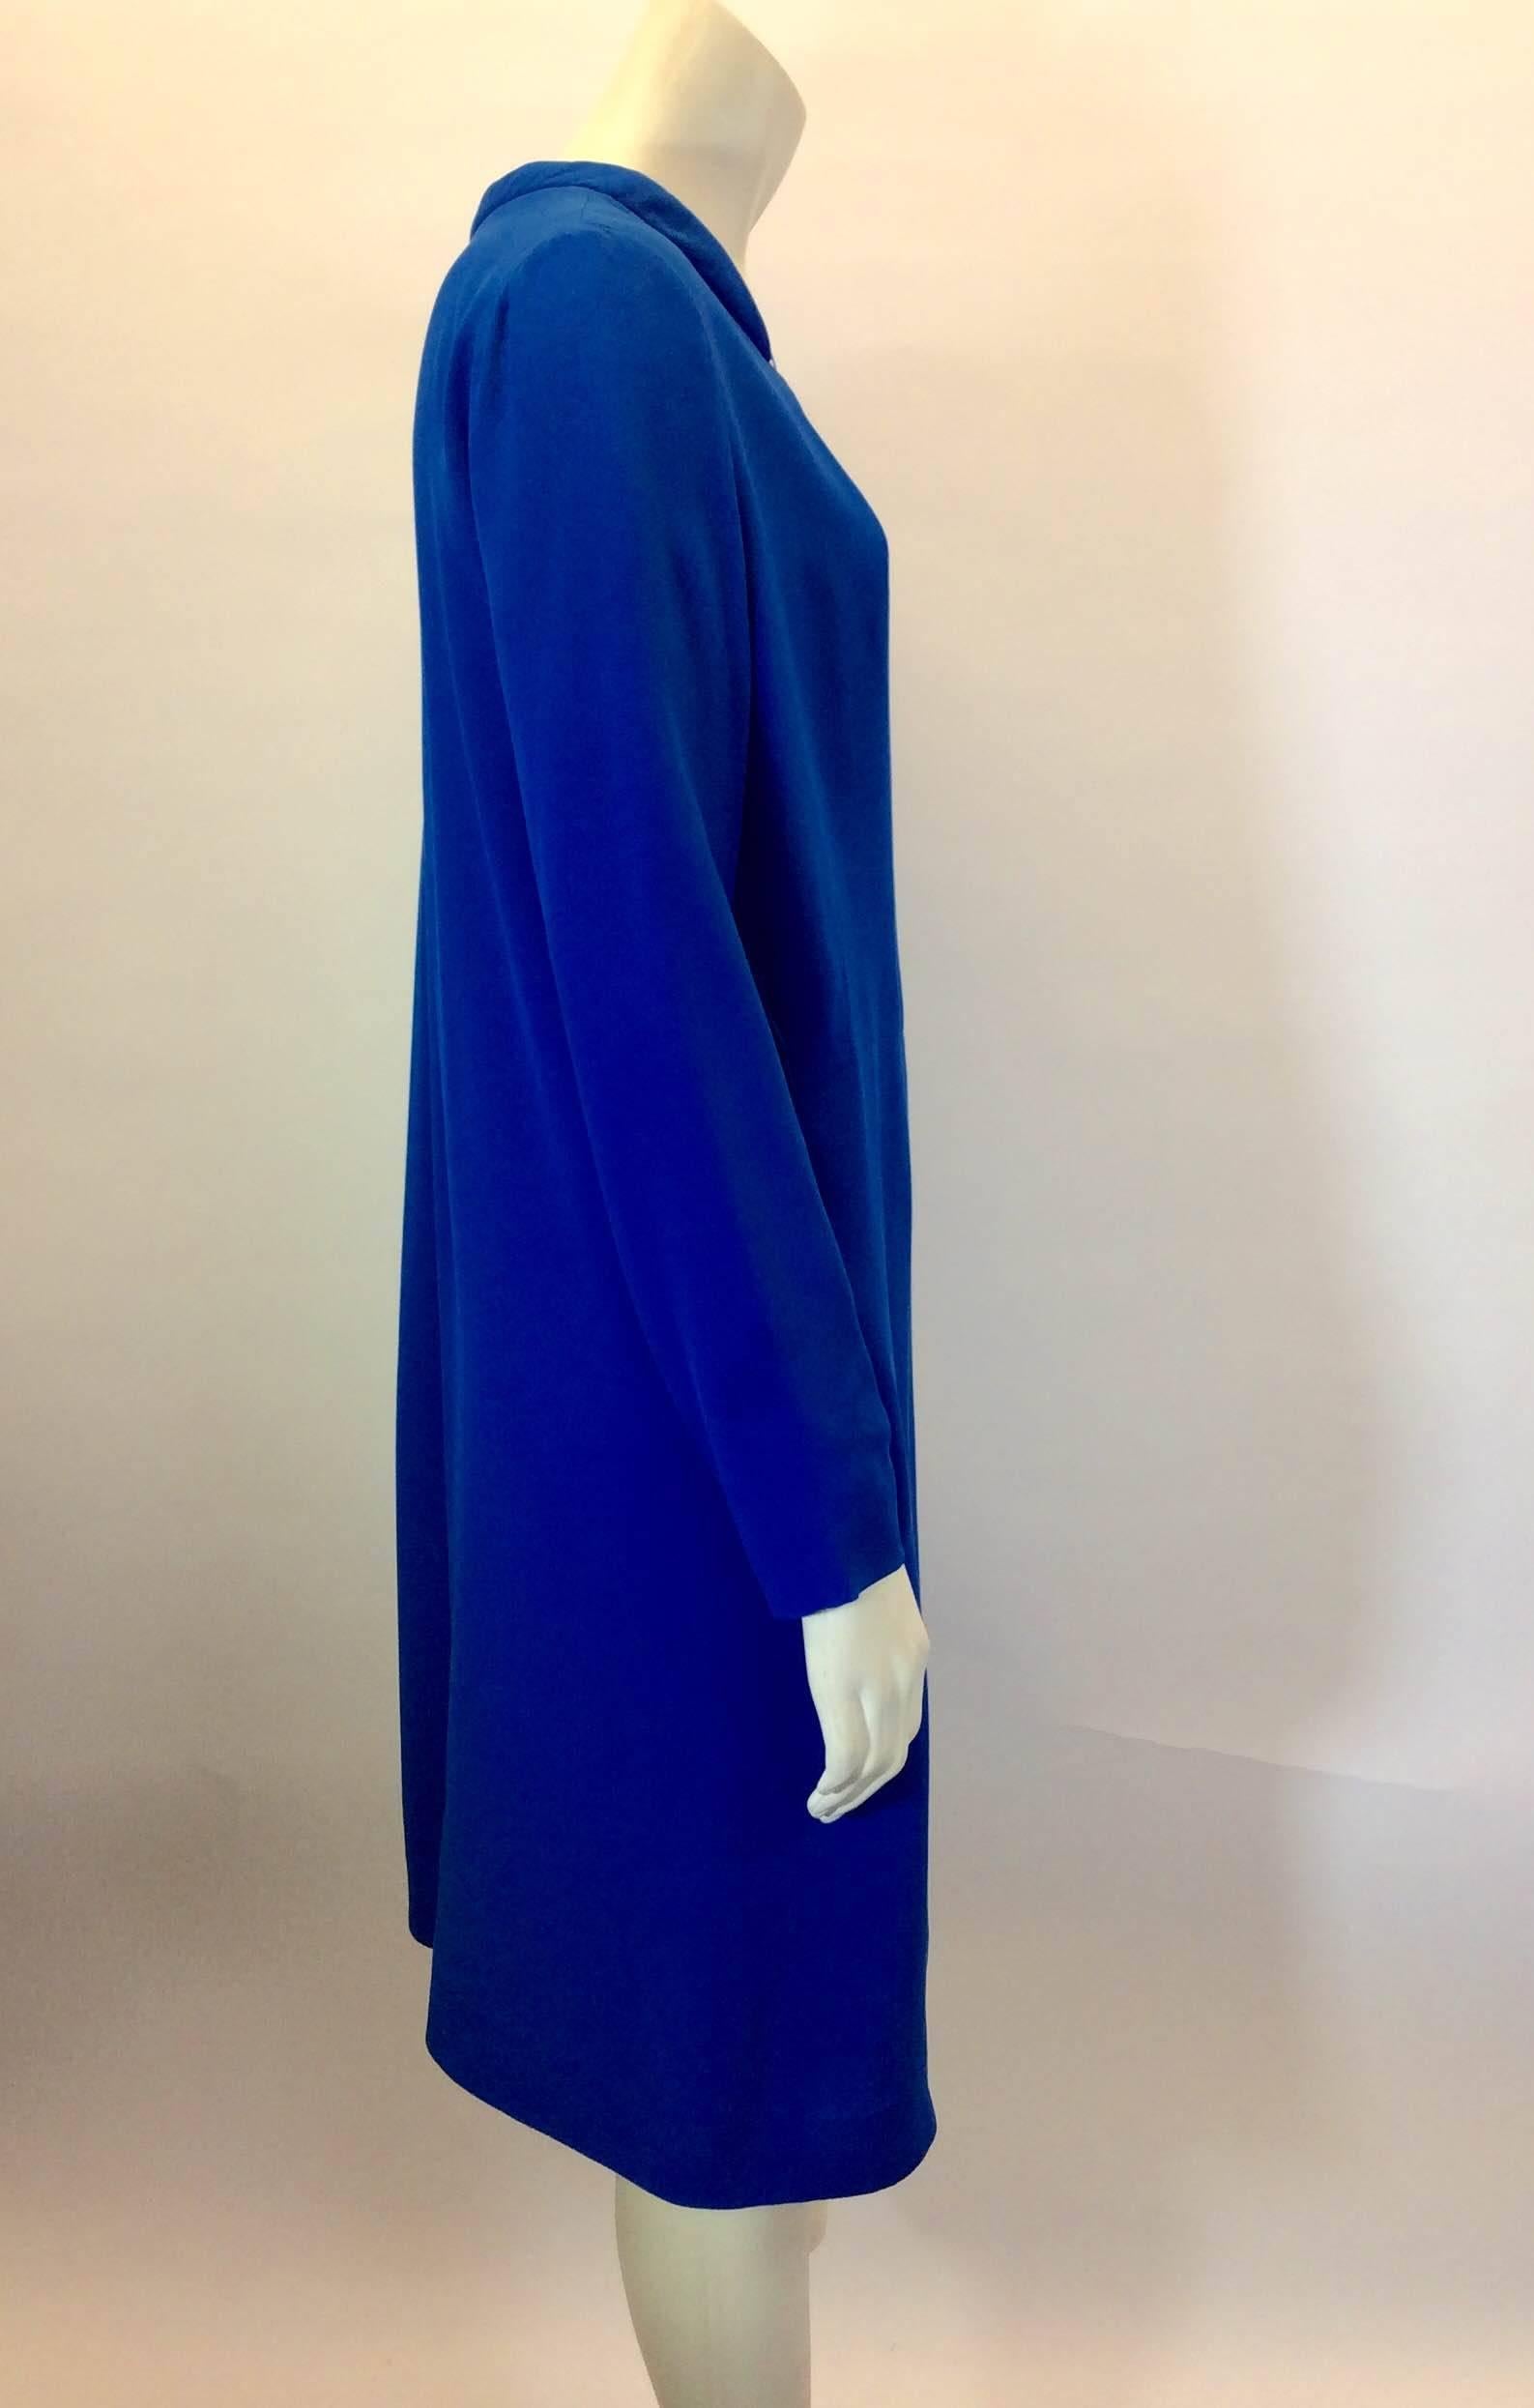 Chloe Royal Blue Silk Shift Cocktail Dress In Excellent Condition For Sale In Narberth, PA